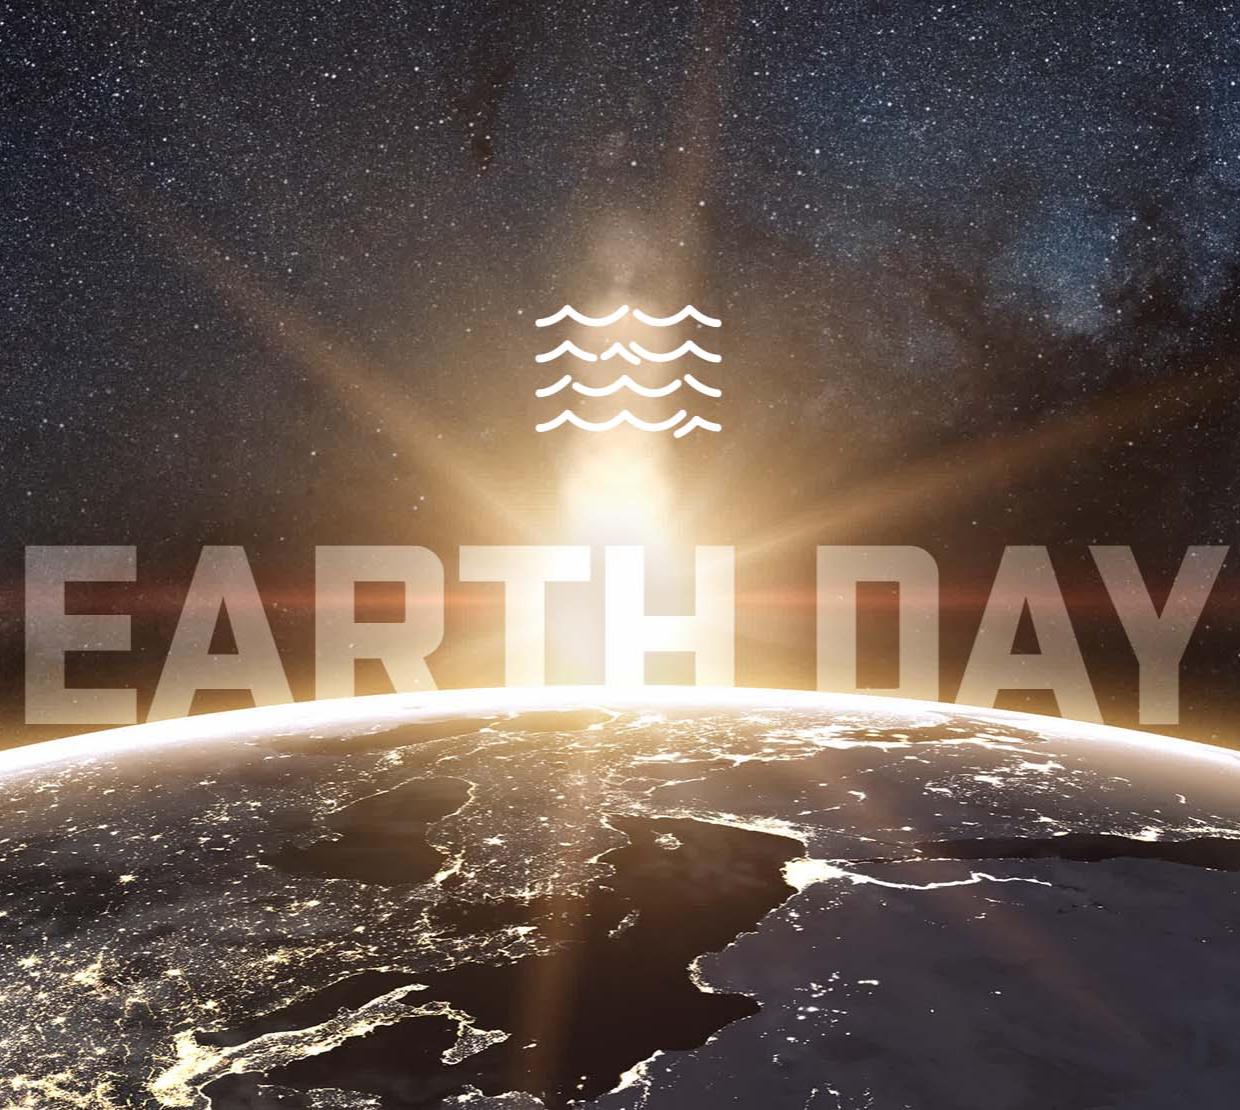 "Earth Day" written over image of Earth at night